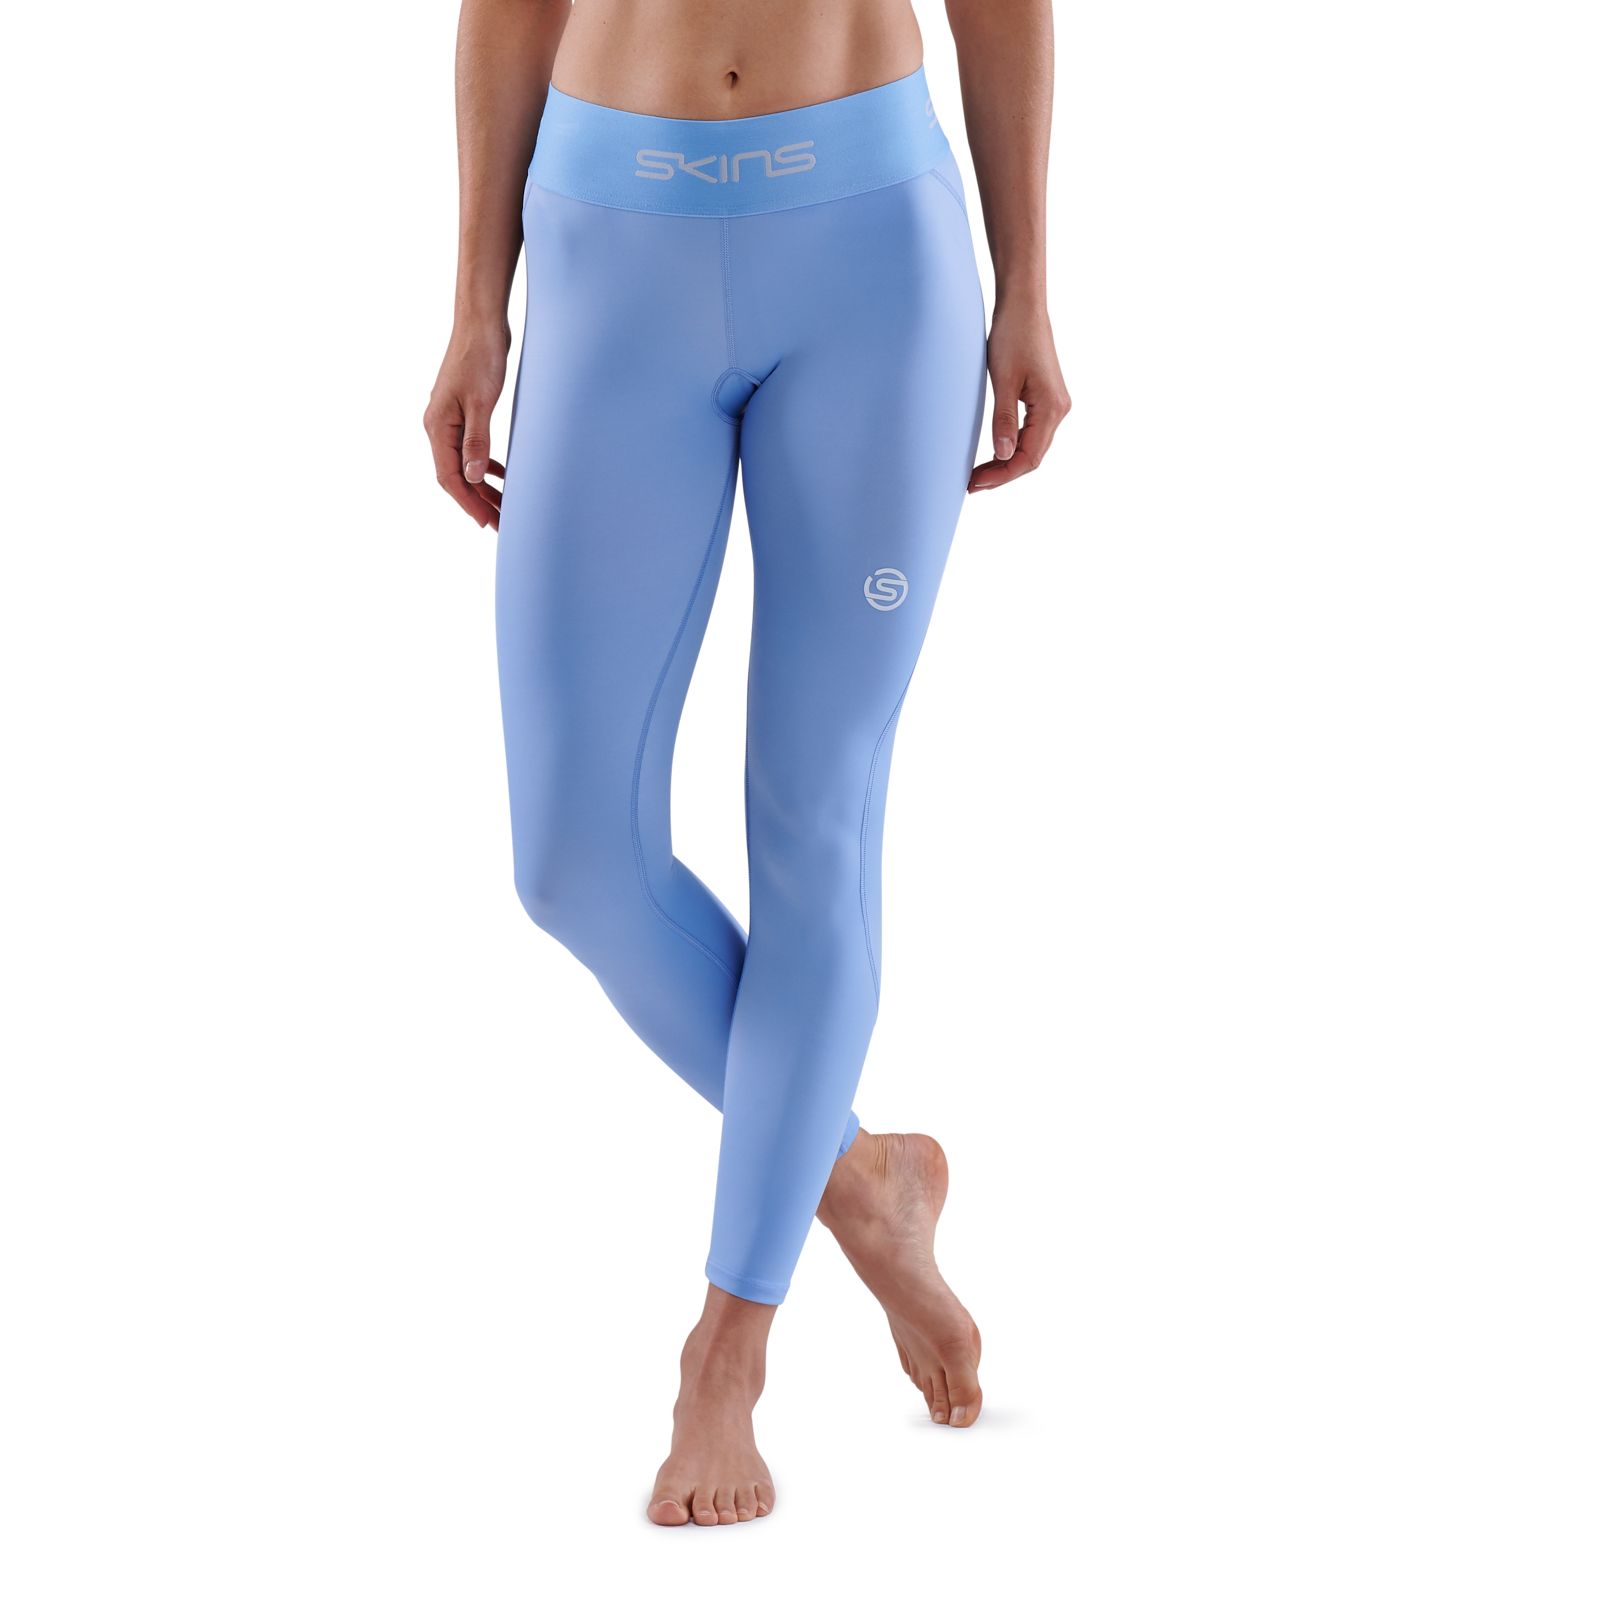 SKINS SERIES-1 WOMEN'S 7/8 TIGHTS SKY BLUE - SKINS Compression USA